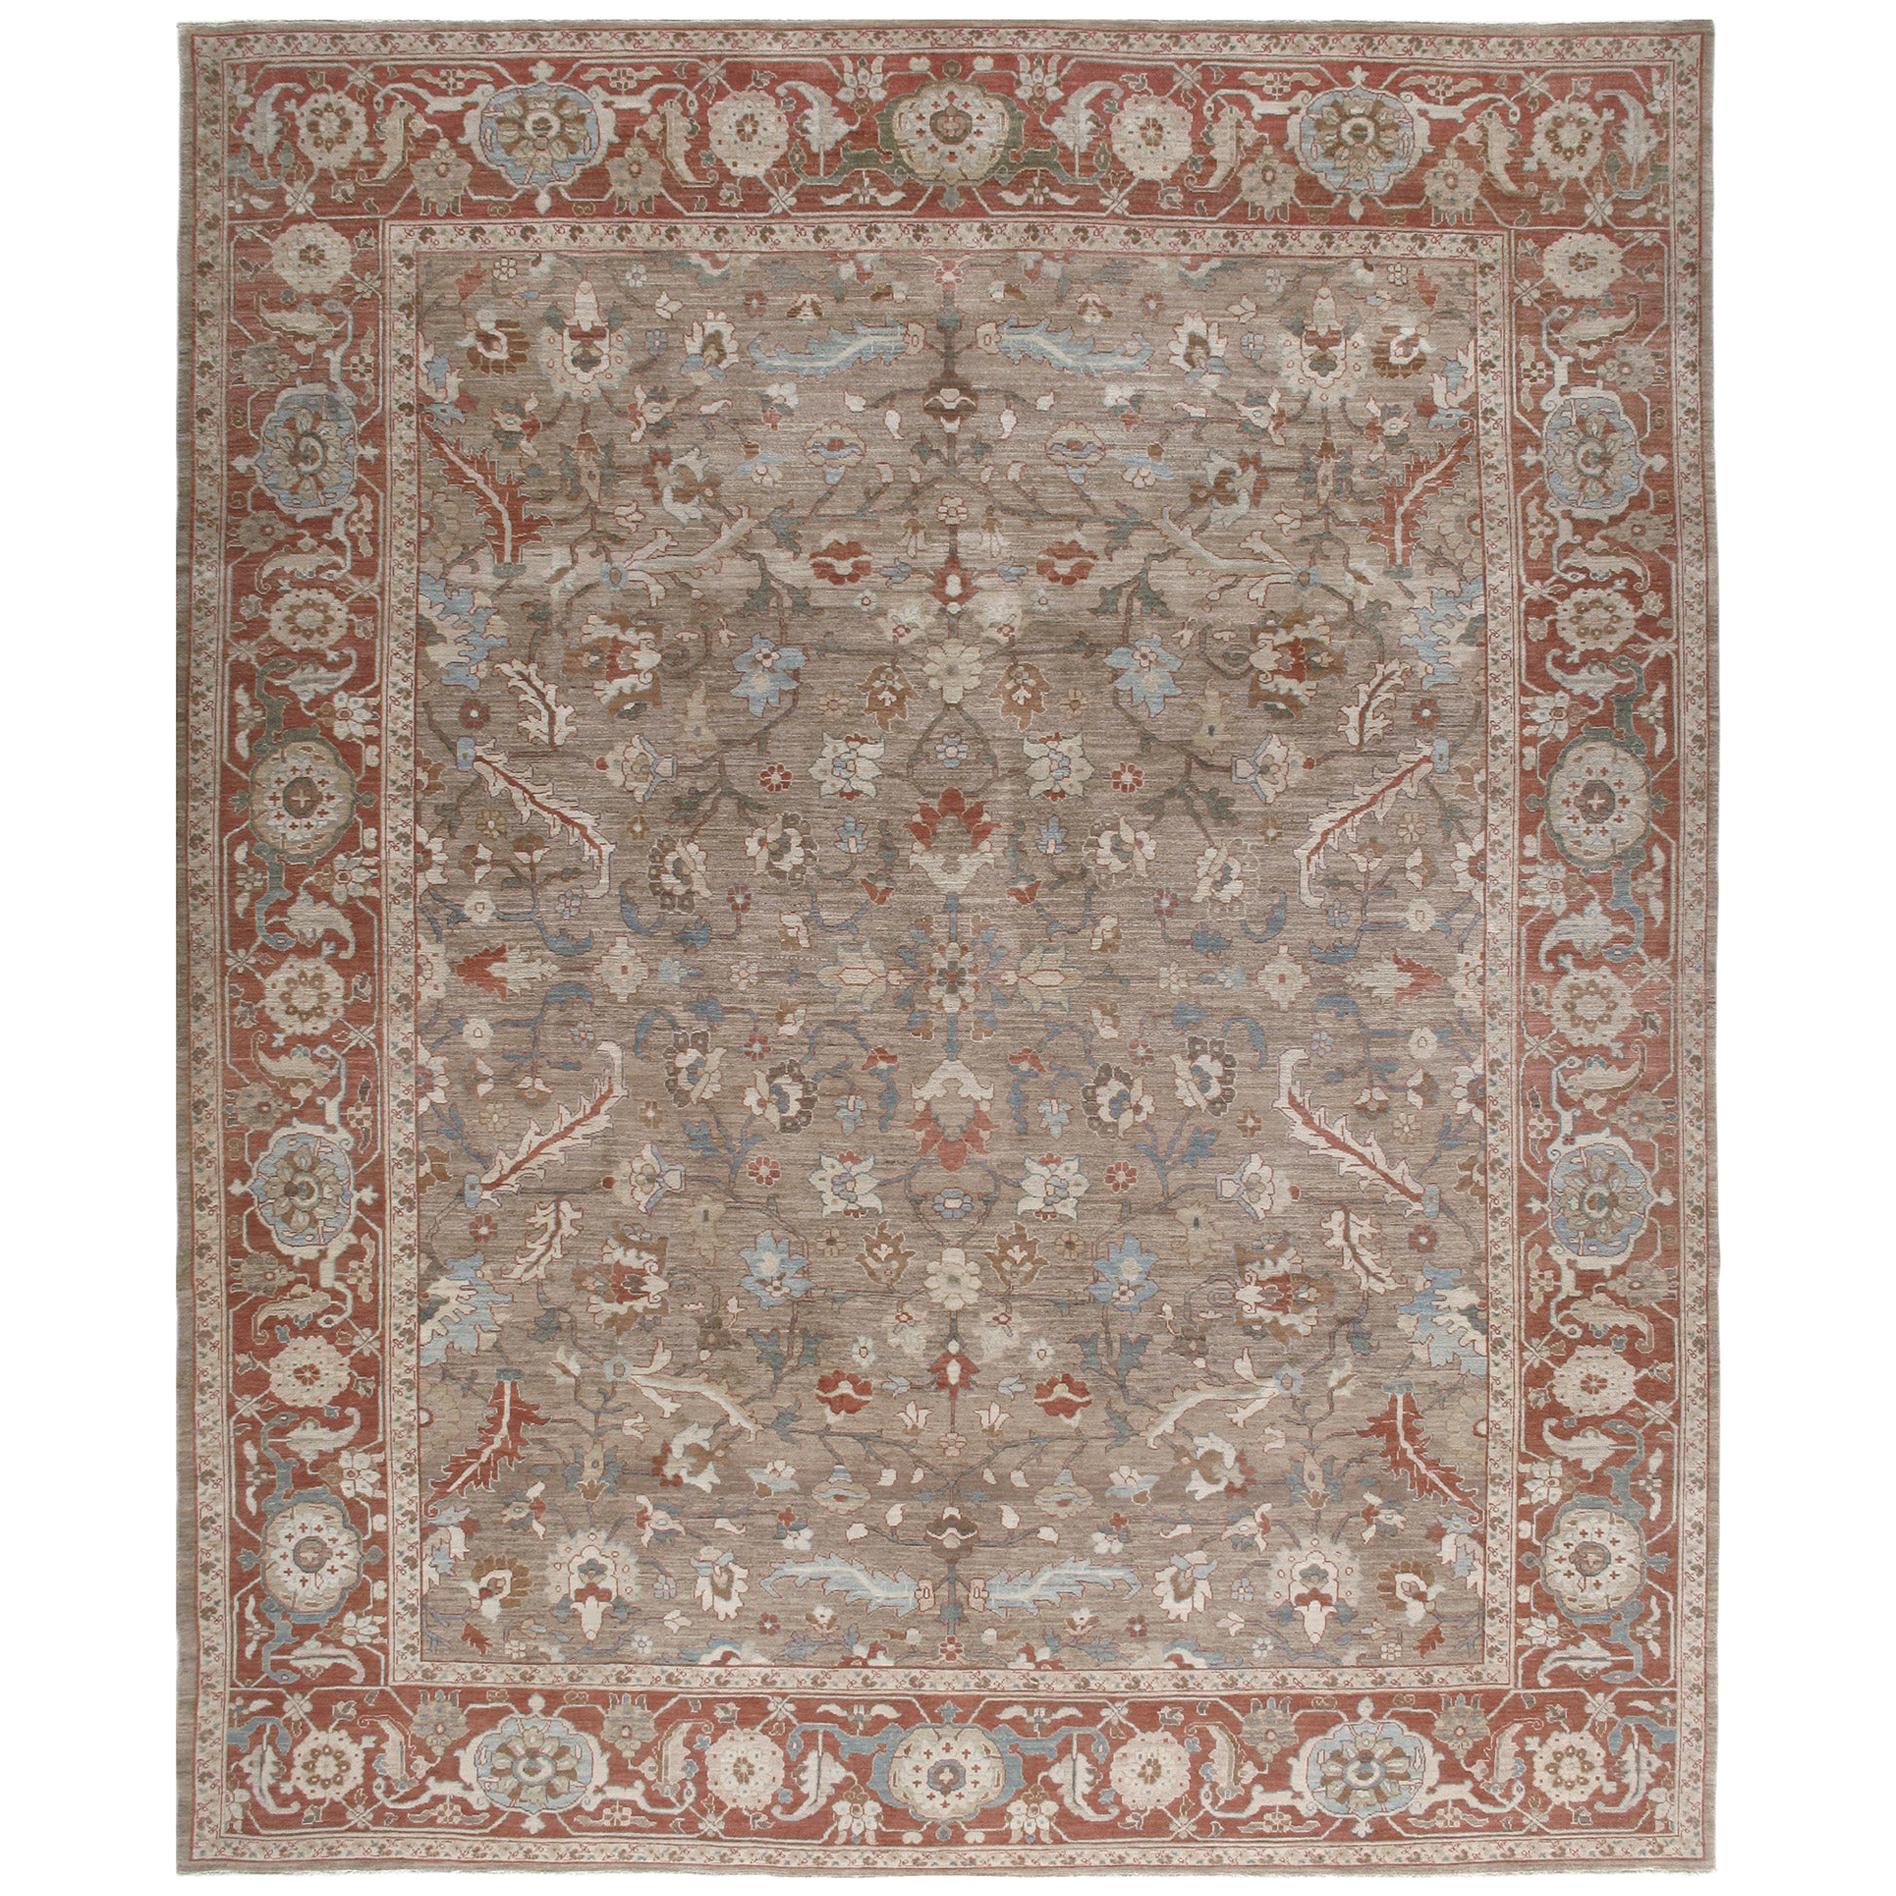 Persian Traditional Bakshaish Handknotted Rug in Camel and Red Color